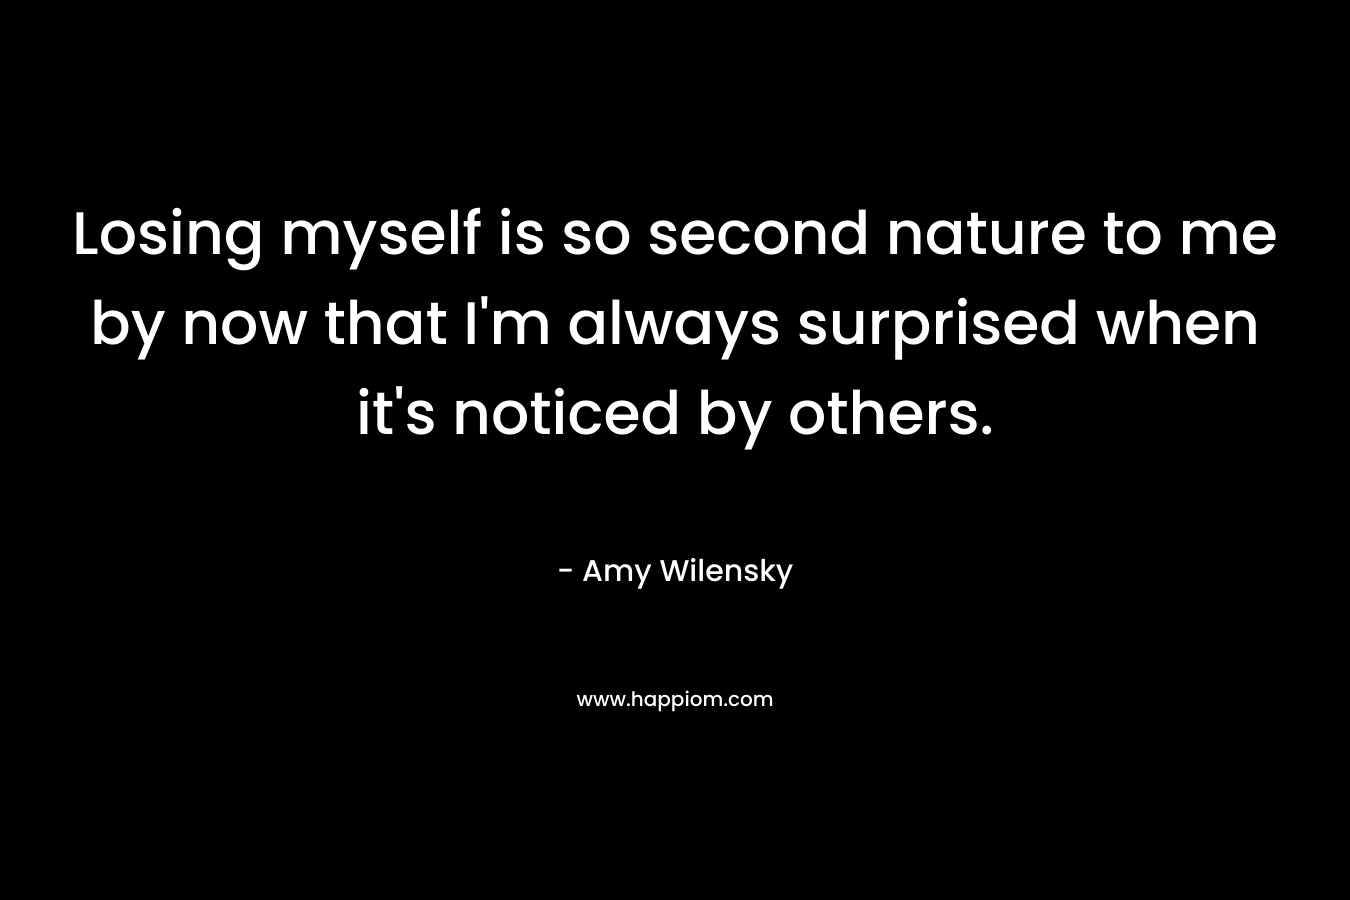 Losing myself is so second nature to me by now that I’m always surprised when it’s noticed by others. – Amy Wilensky